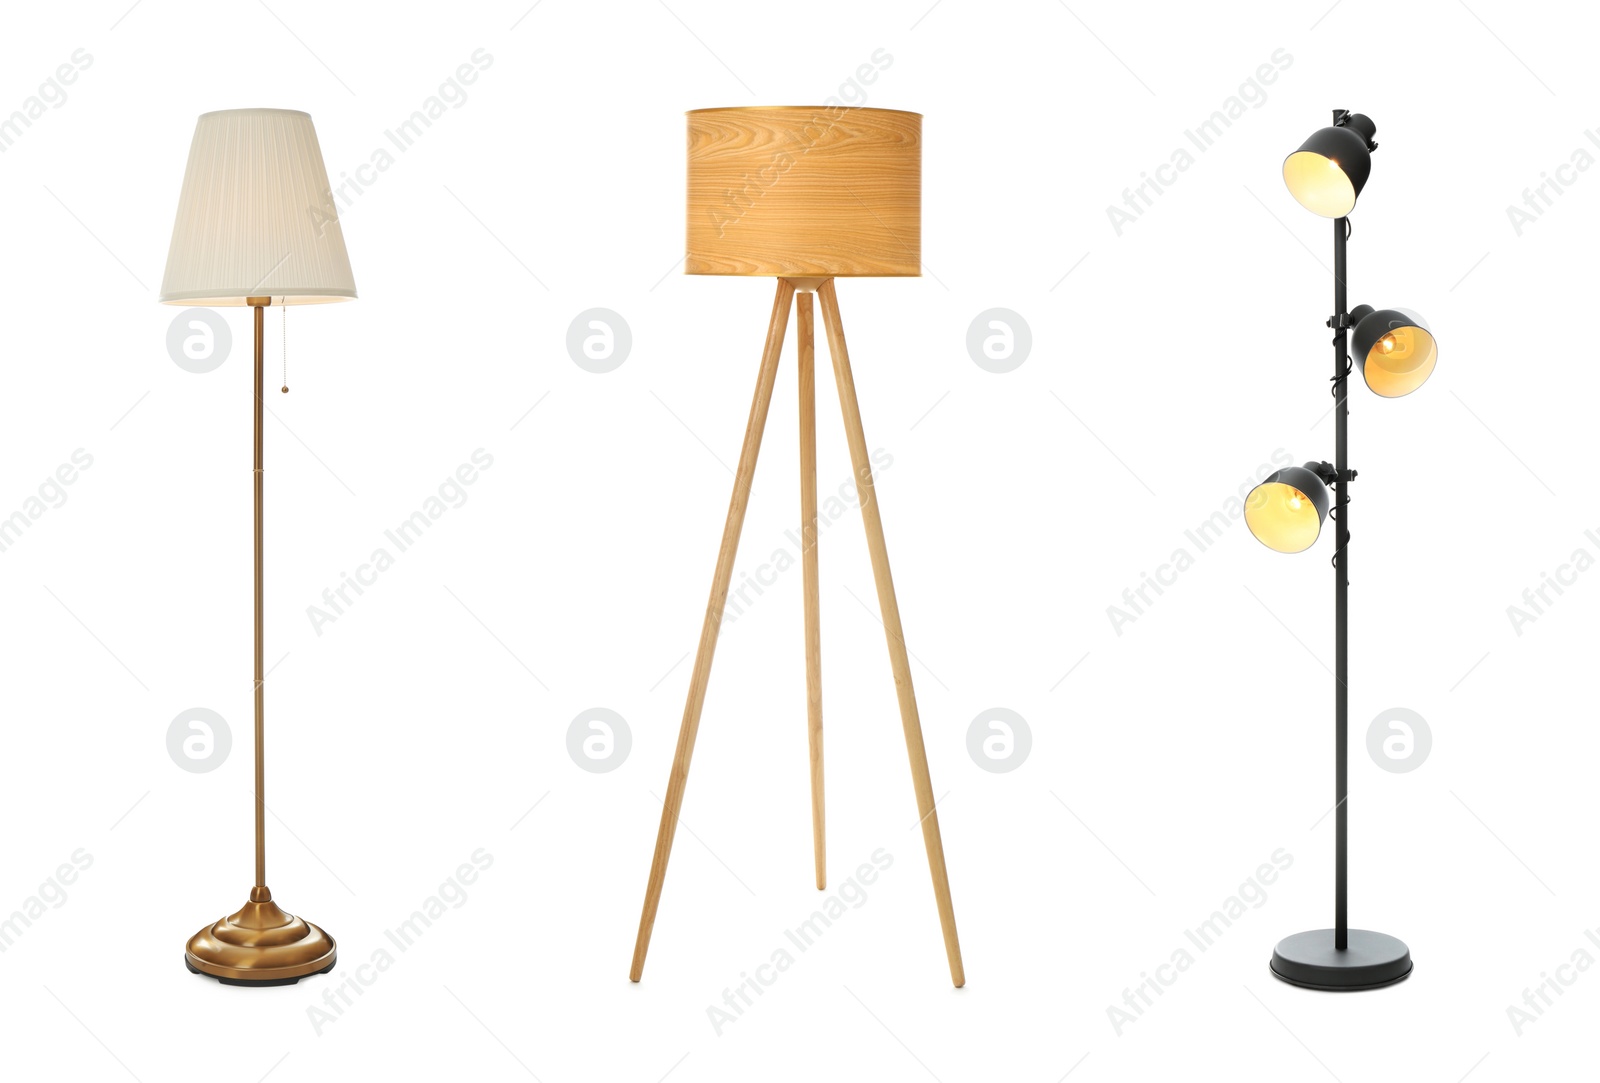 Image of Set with different stylish floor lamps on white background